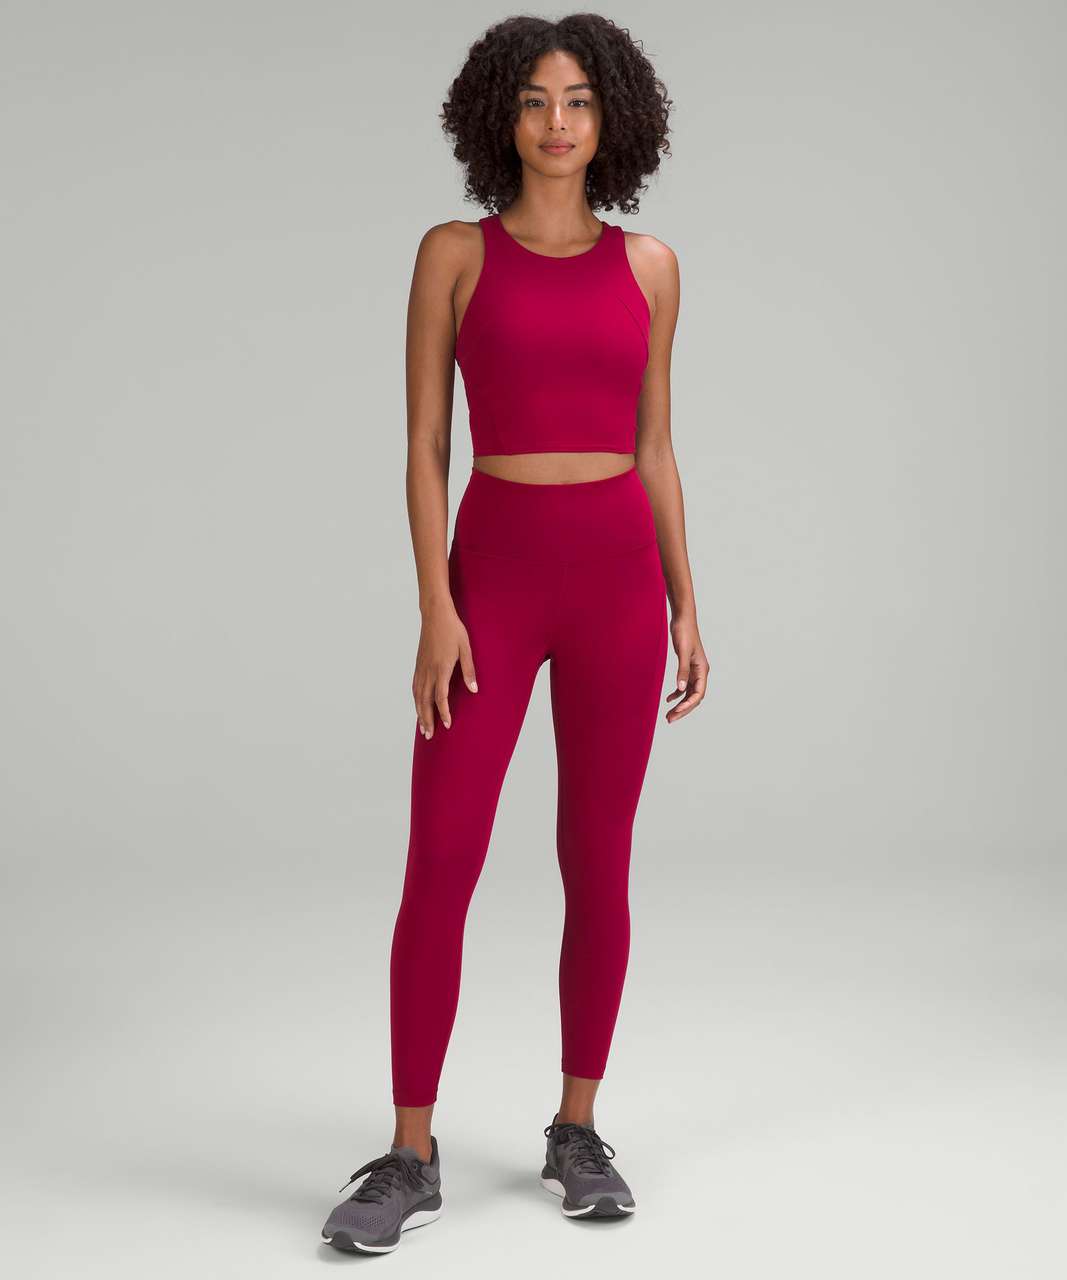 Lululemon Wunder Train High-Rise Tight with Pockets 25" - Pomegranate